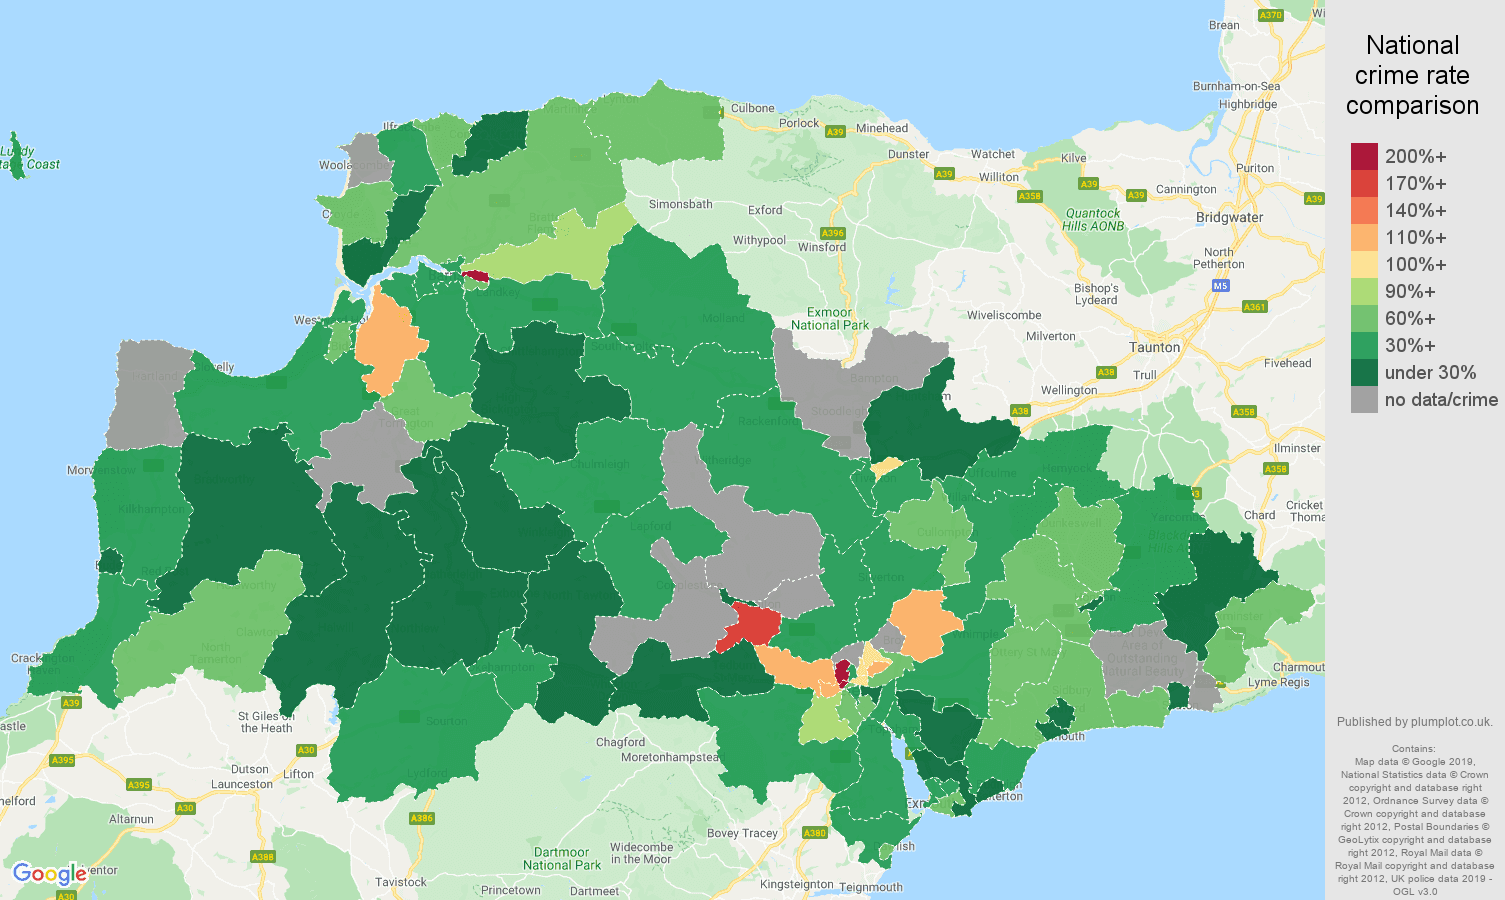 Exeter other crime rate comparison map